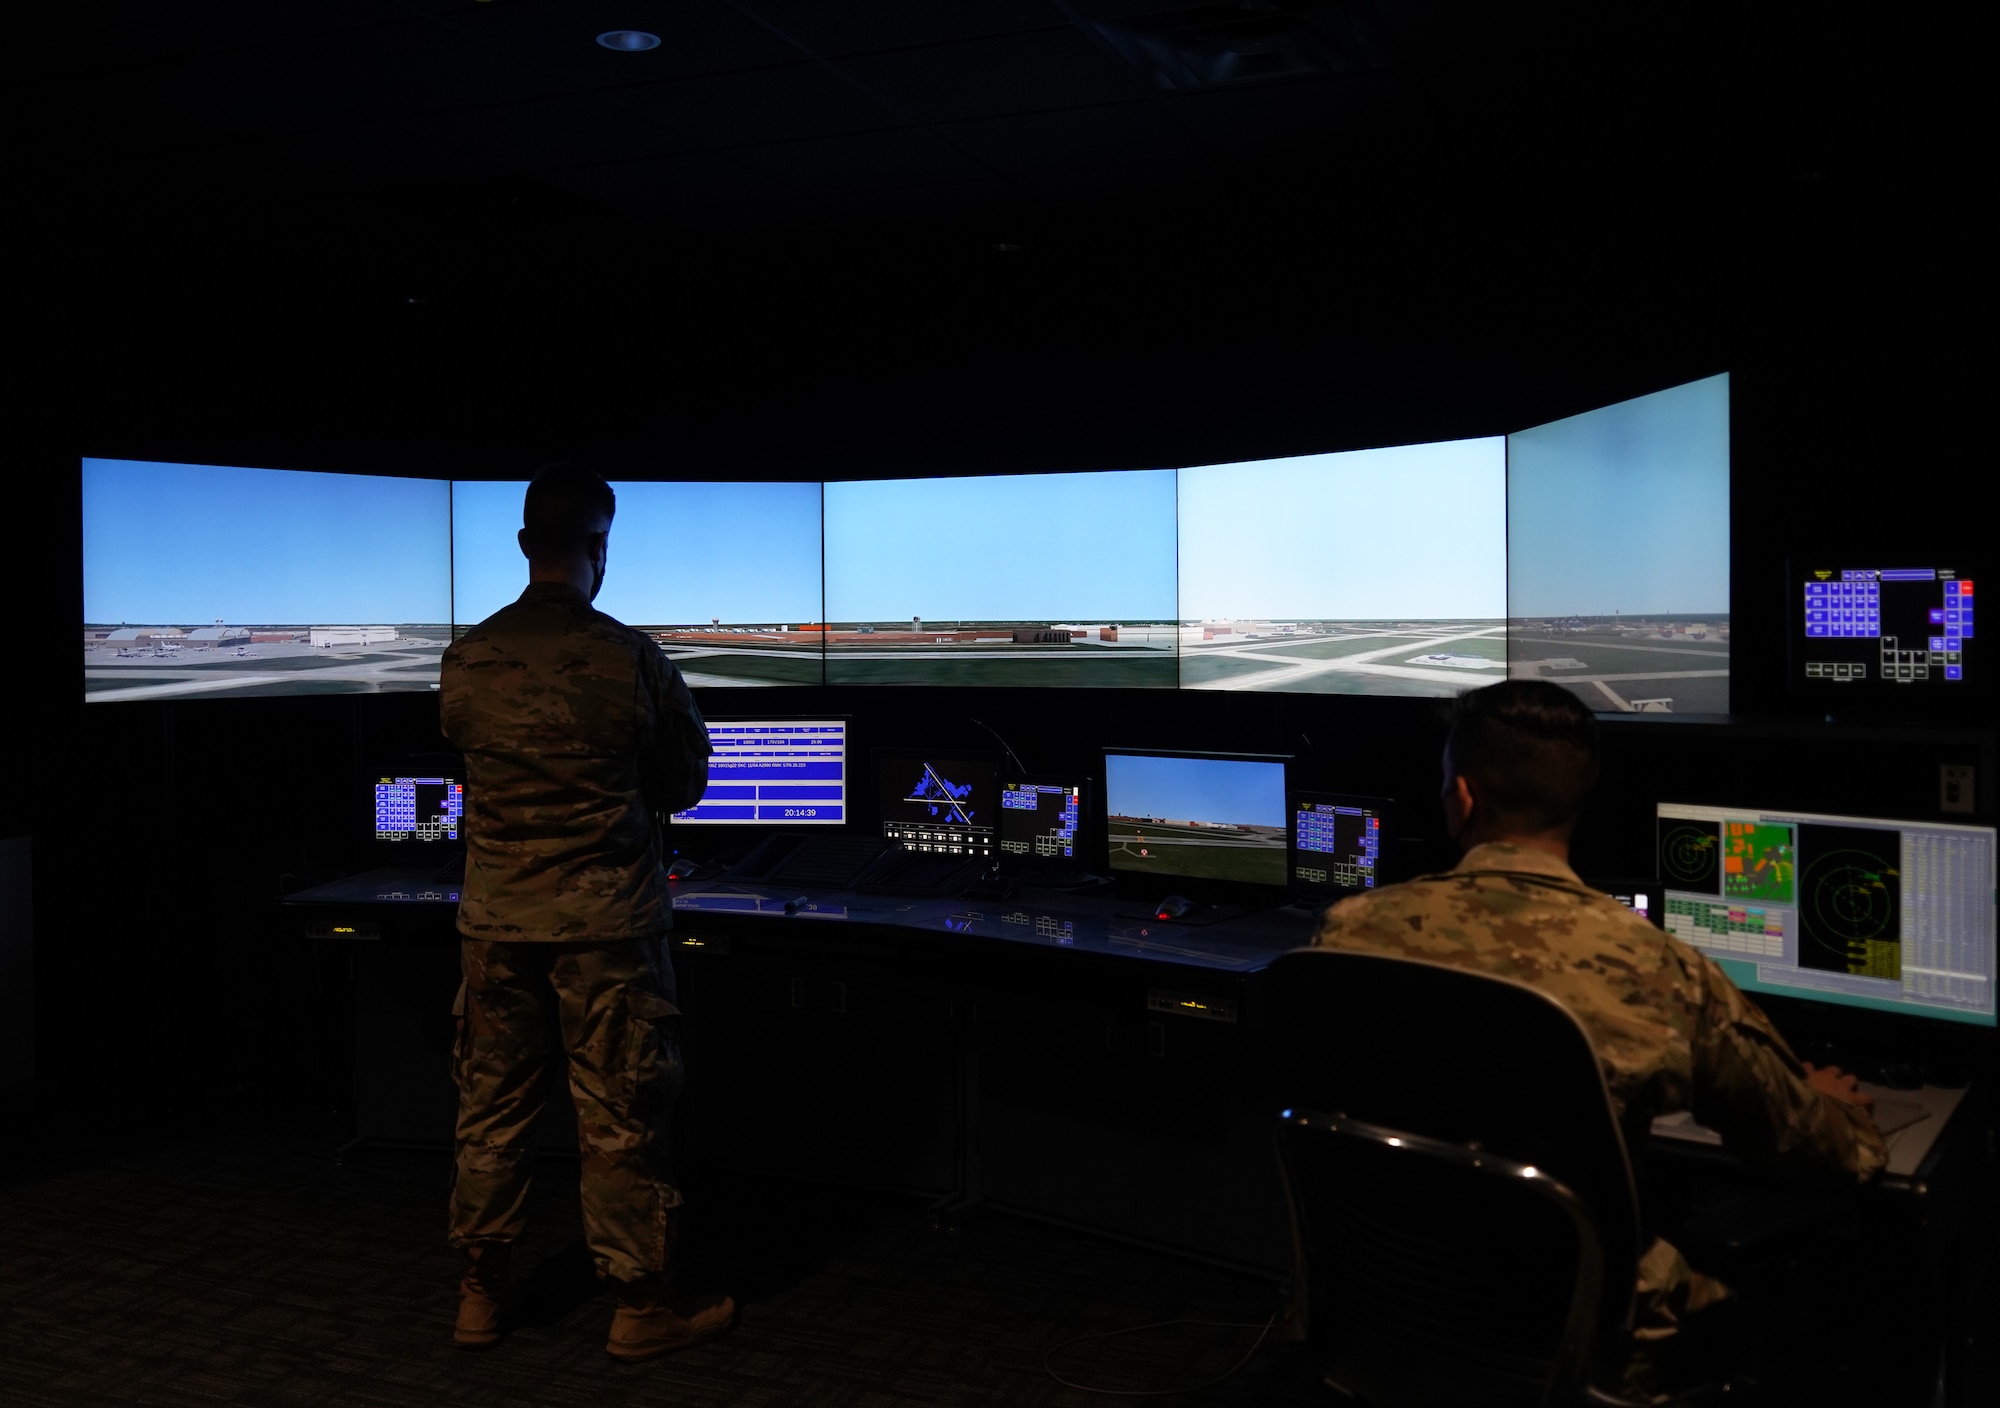 Two airmen in a simulated environment